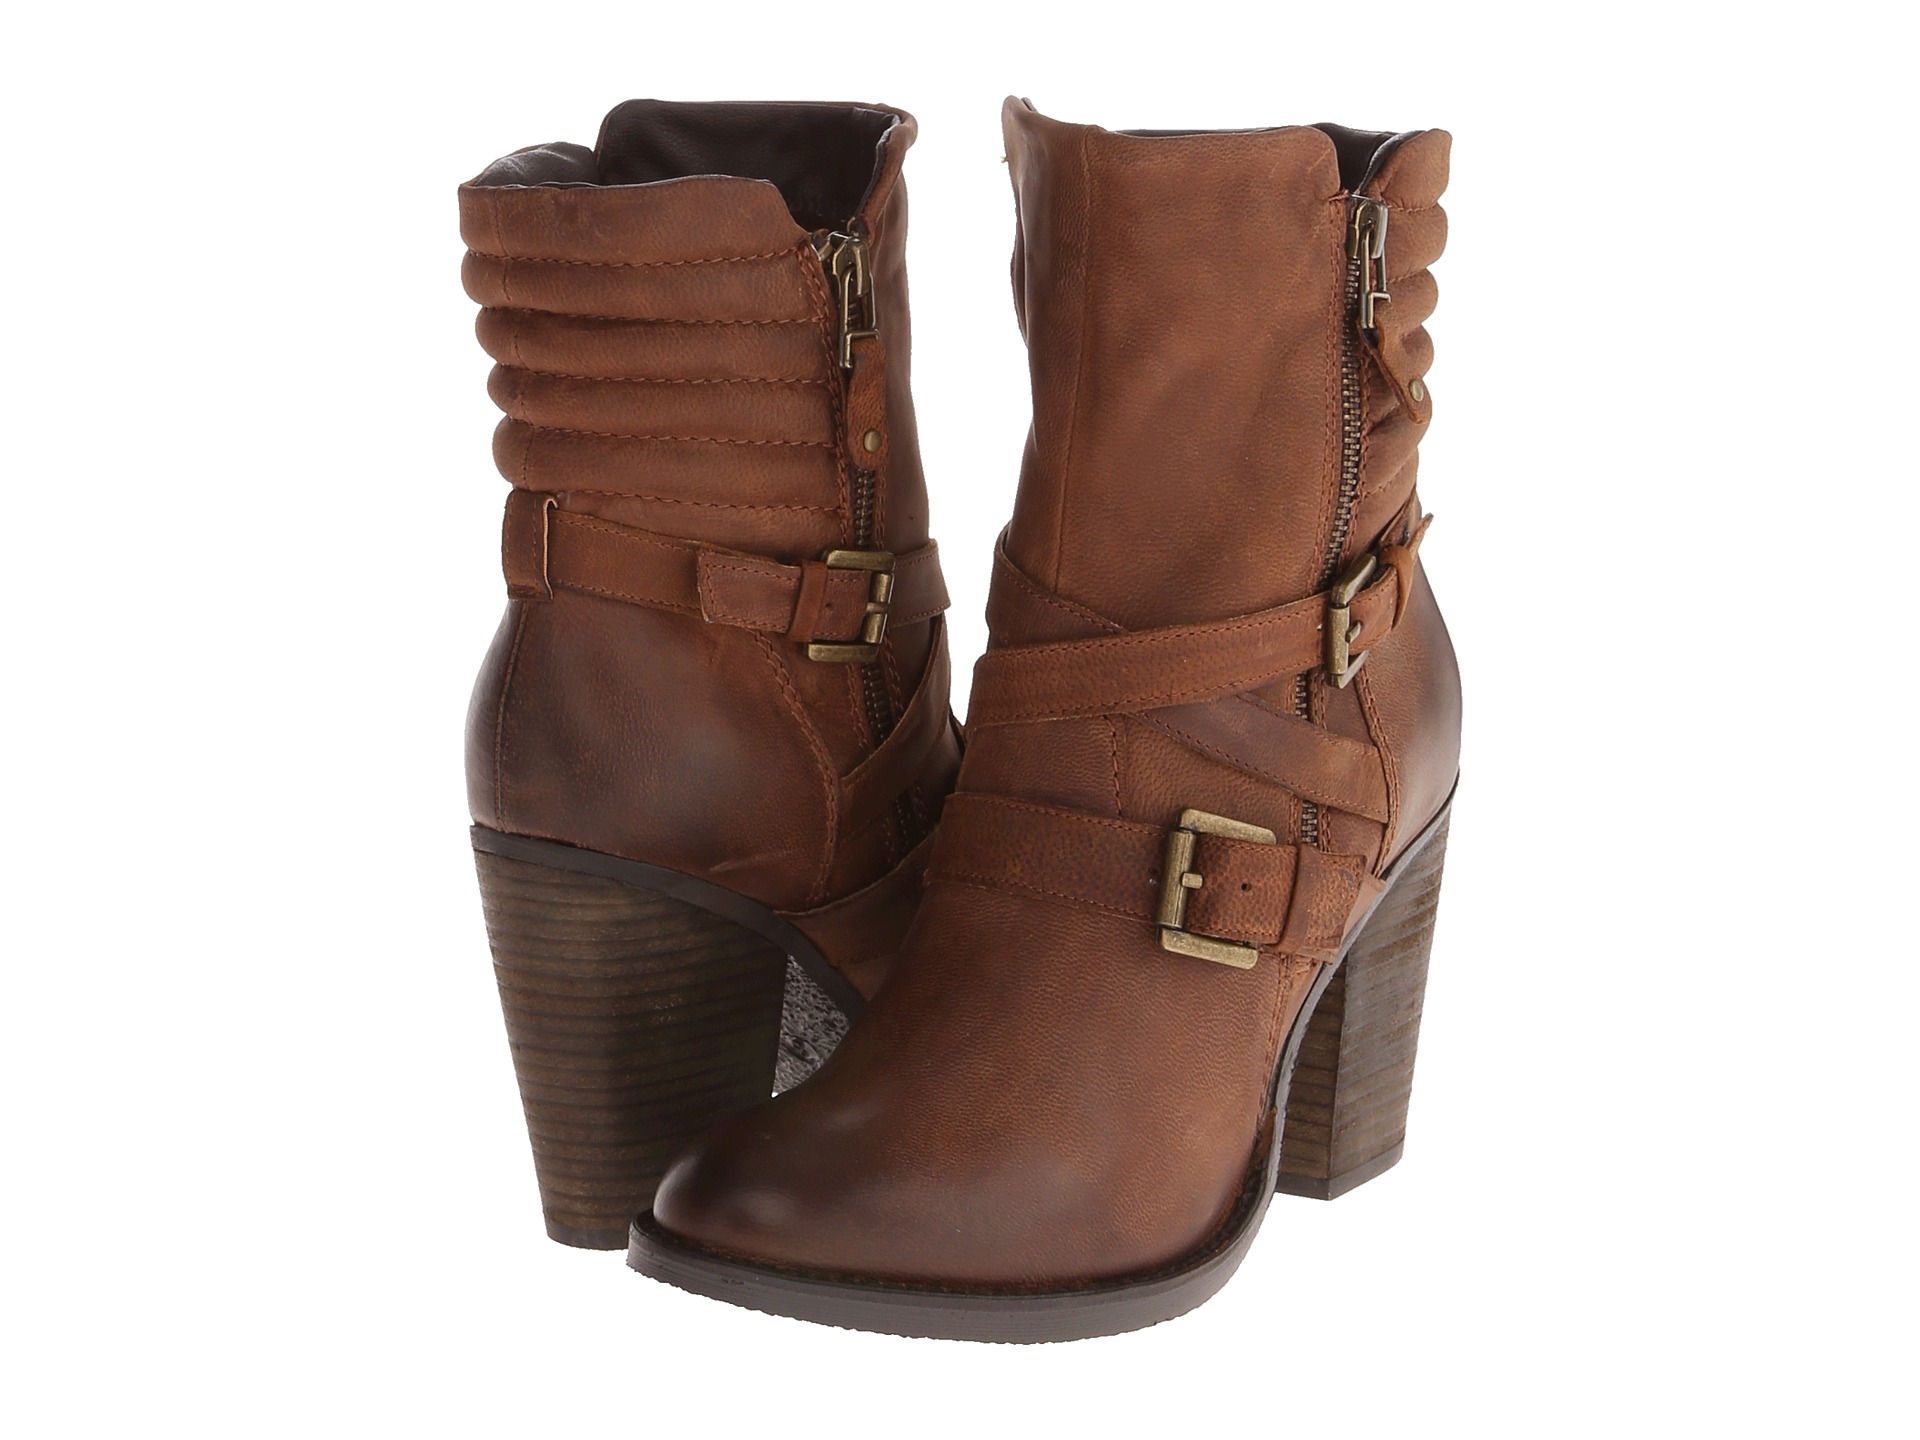 No results for steve madden raleighh cognac - Search Zappos